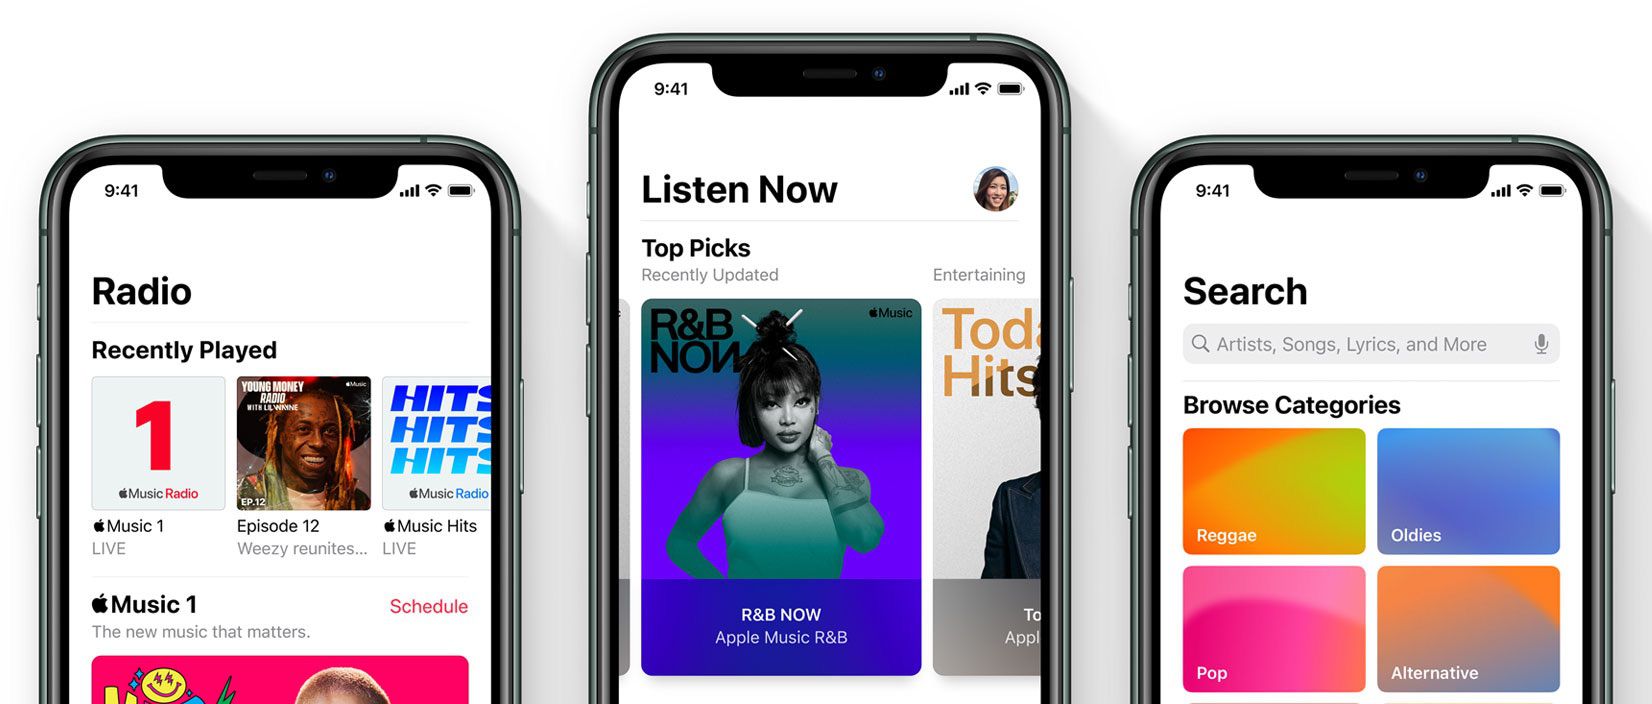 Apple Music Spotify charts with a penny paid per stream